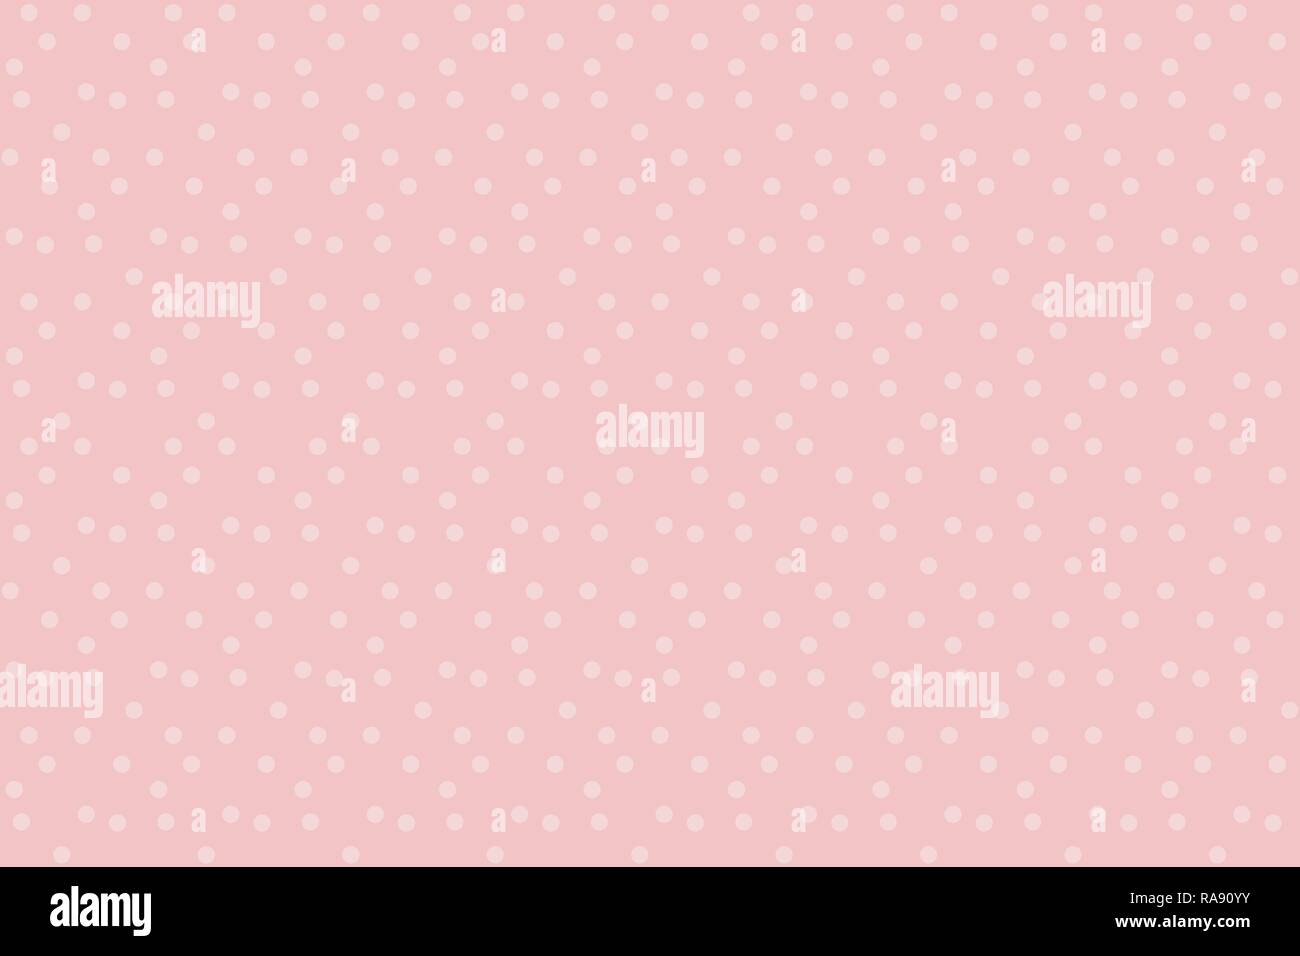 Gently pastel baby color vector background dots seamless pattern Stock Vector